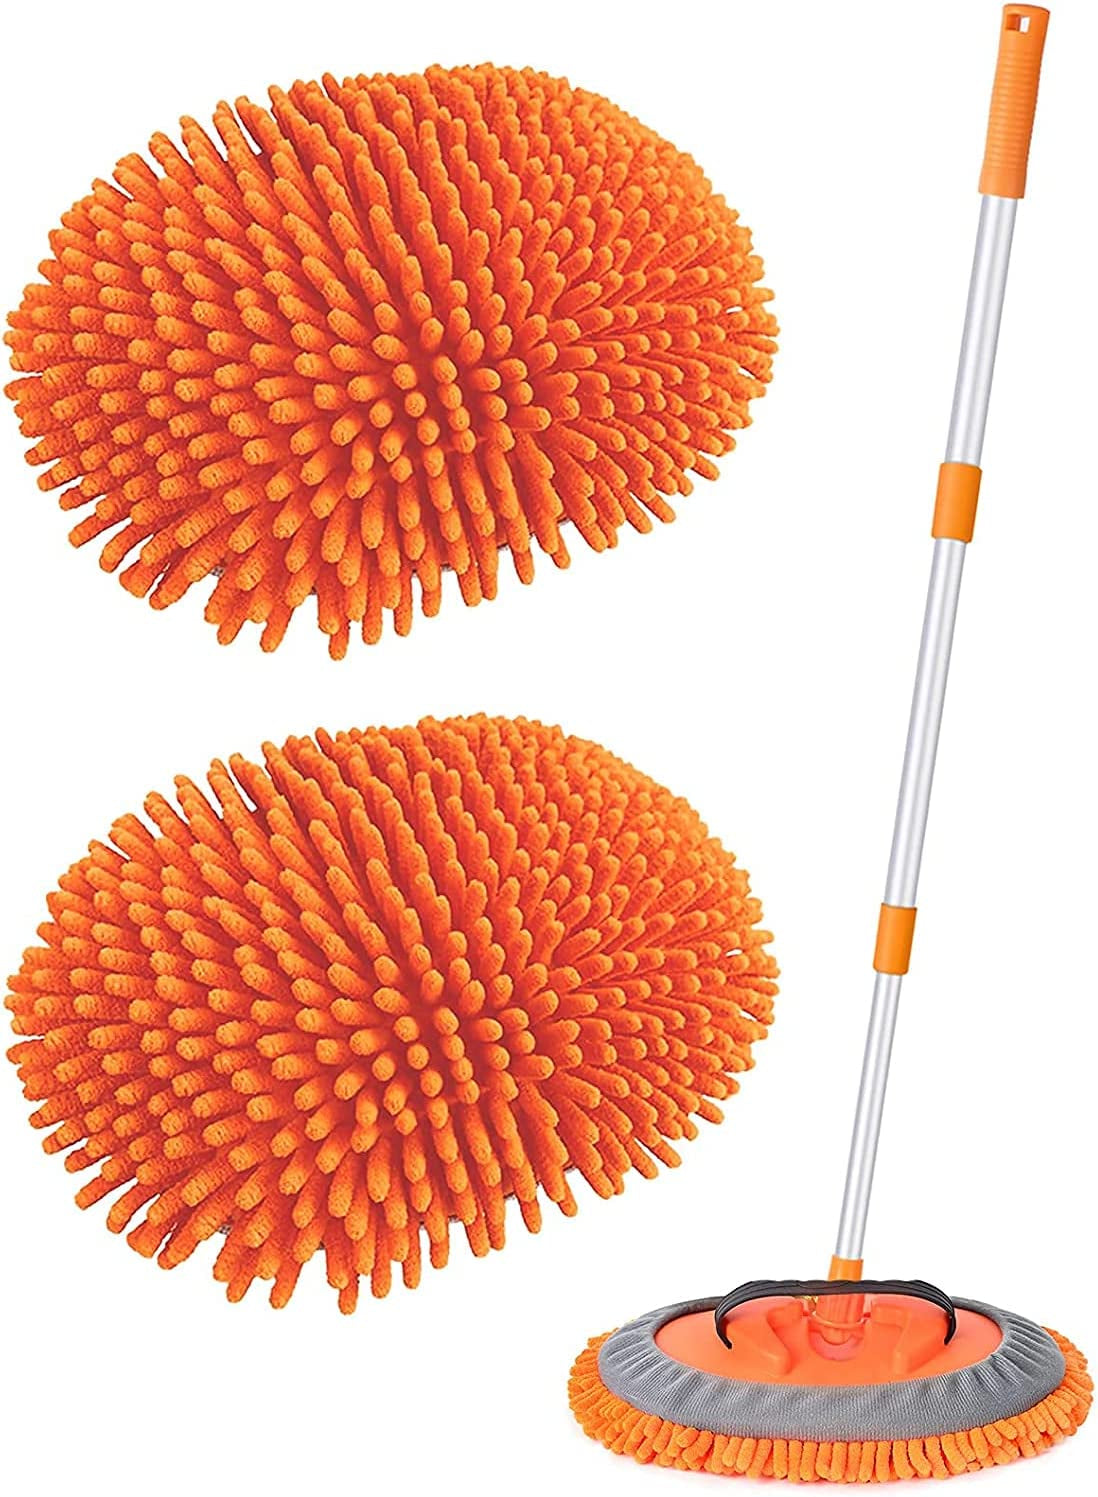 41" Microfiber Car Wash Brush with Long Handle, Mitt Sponge Supplie Kit , 1 Chenille Scratch-Free Replacement Head